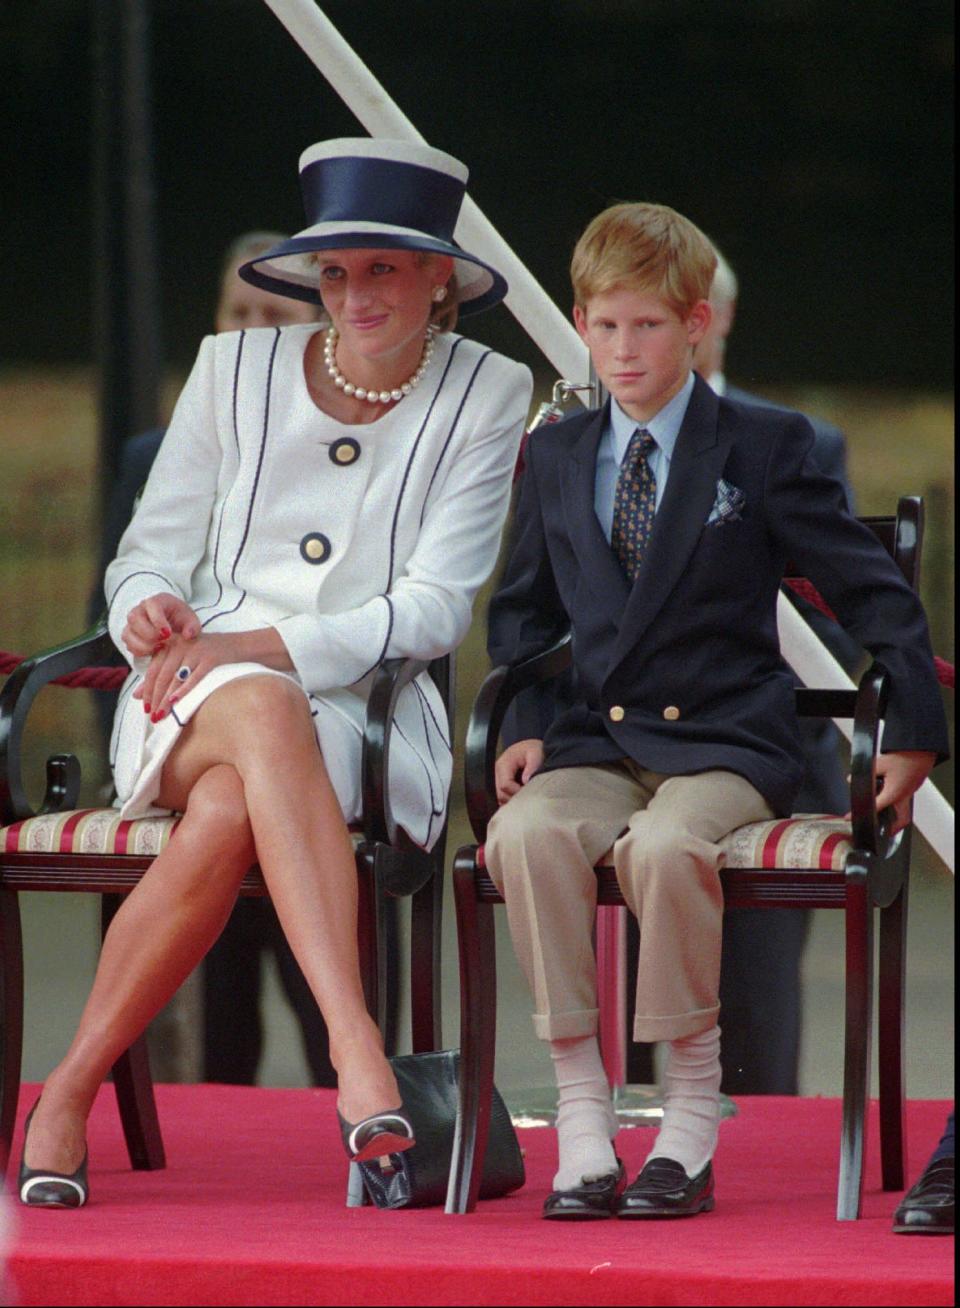 Britain's Princess of Wales sits next to her yougest son Prince Harry during V-J day celebrations in London Saturday August 19, 1995. (AP Photo/Alastair Grant)